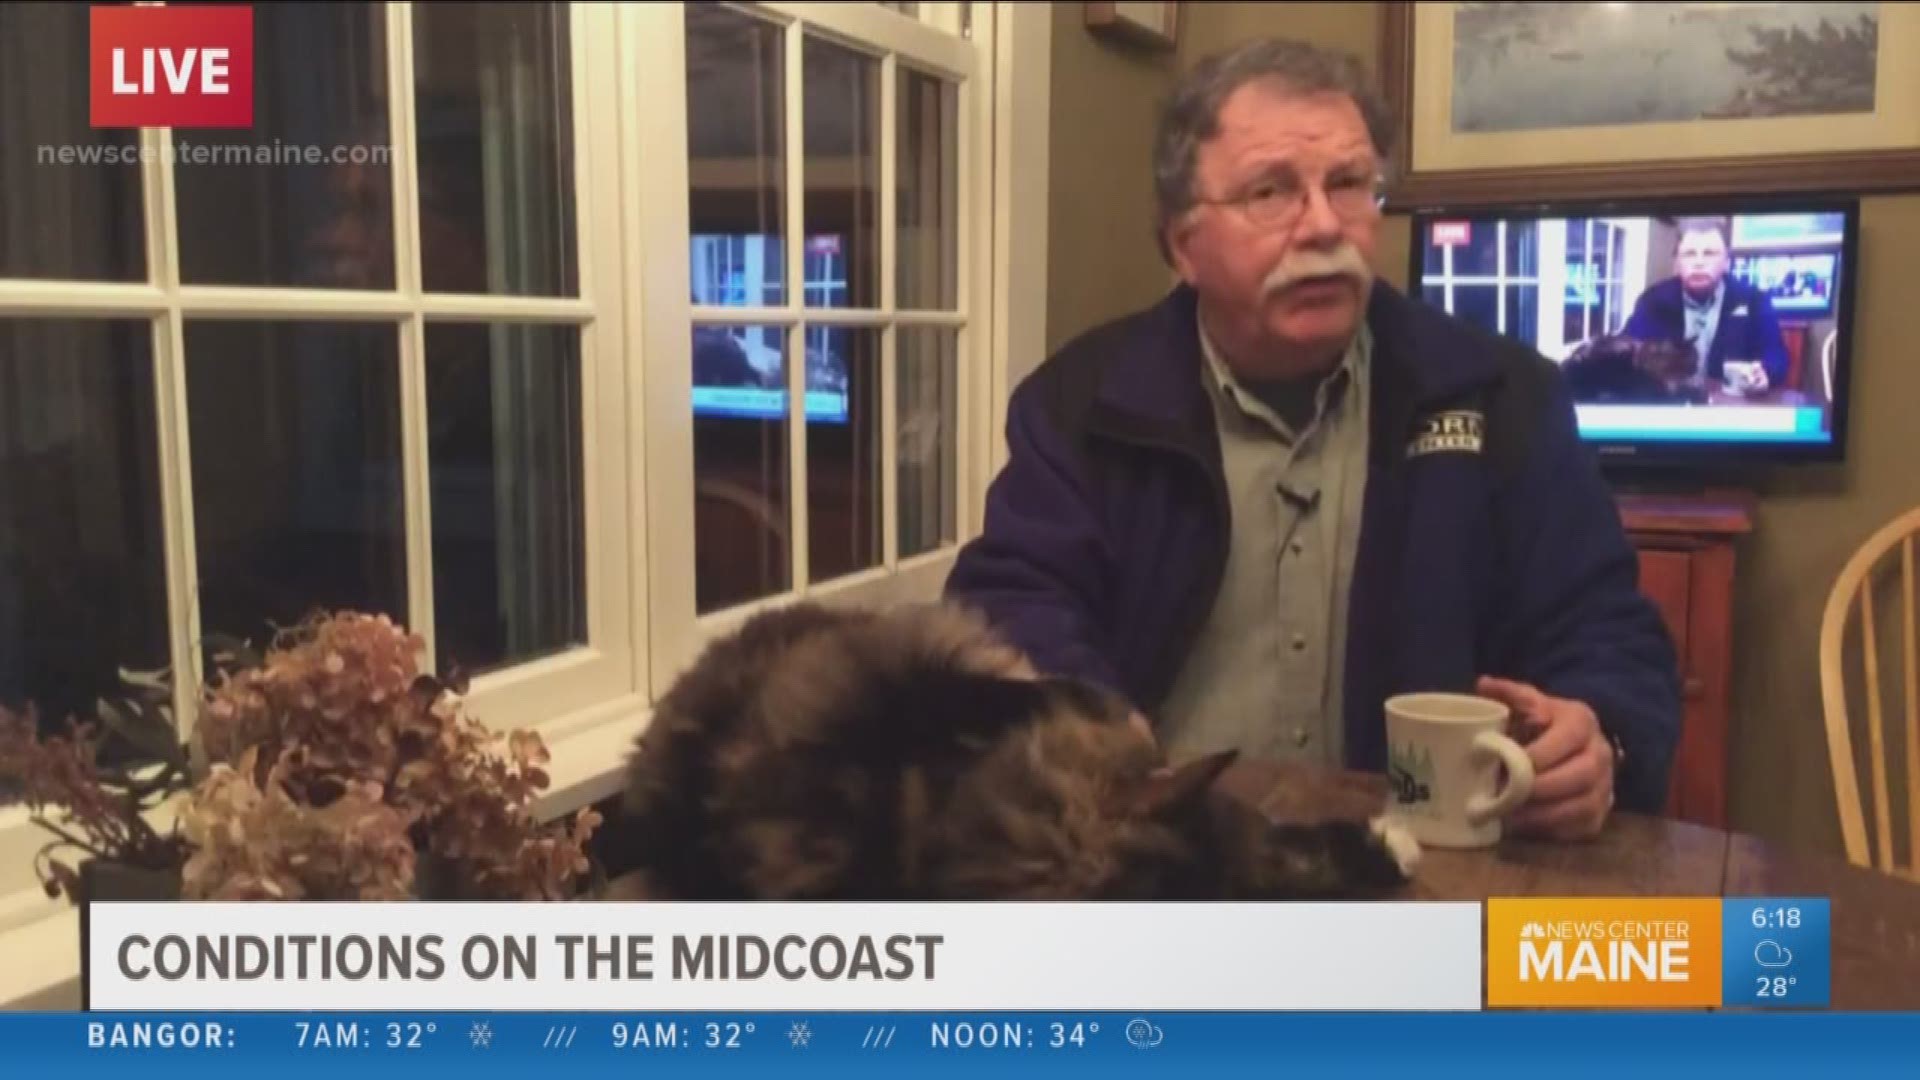 Don Carrigan reports on Midcoast conditions with Wally the cat